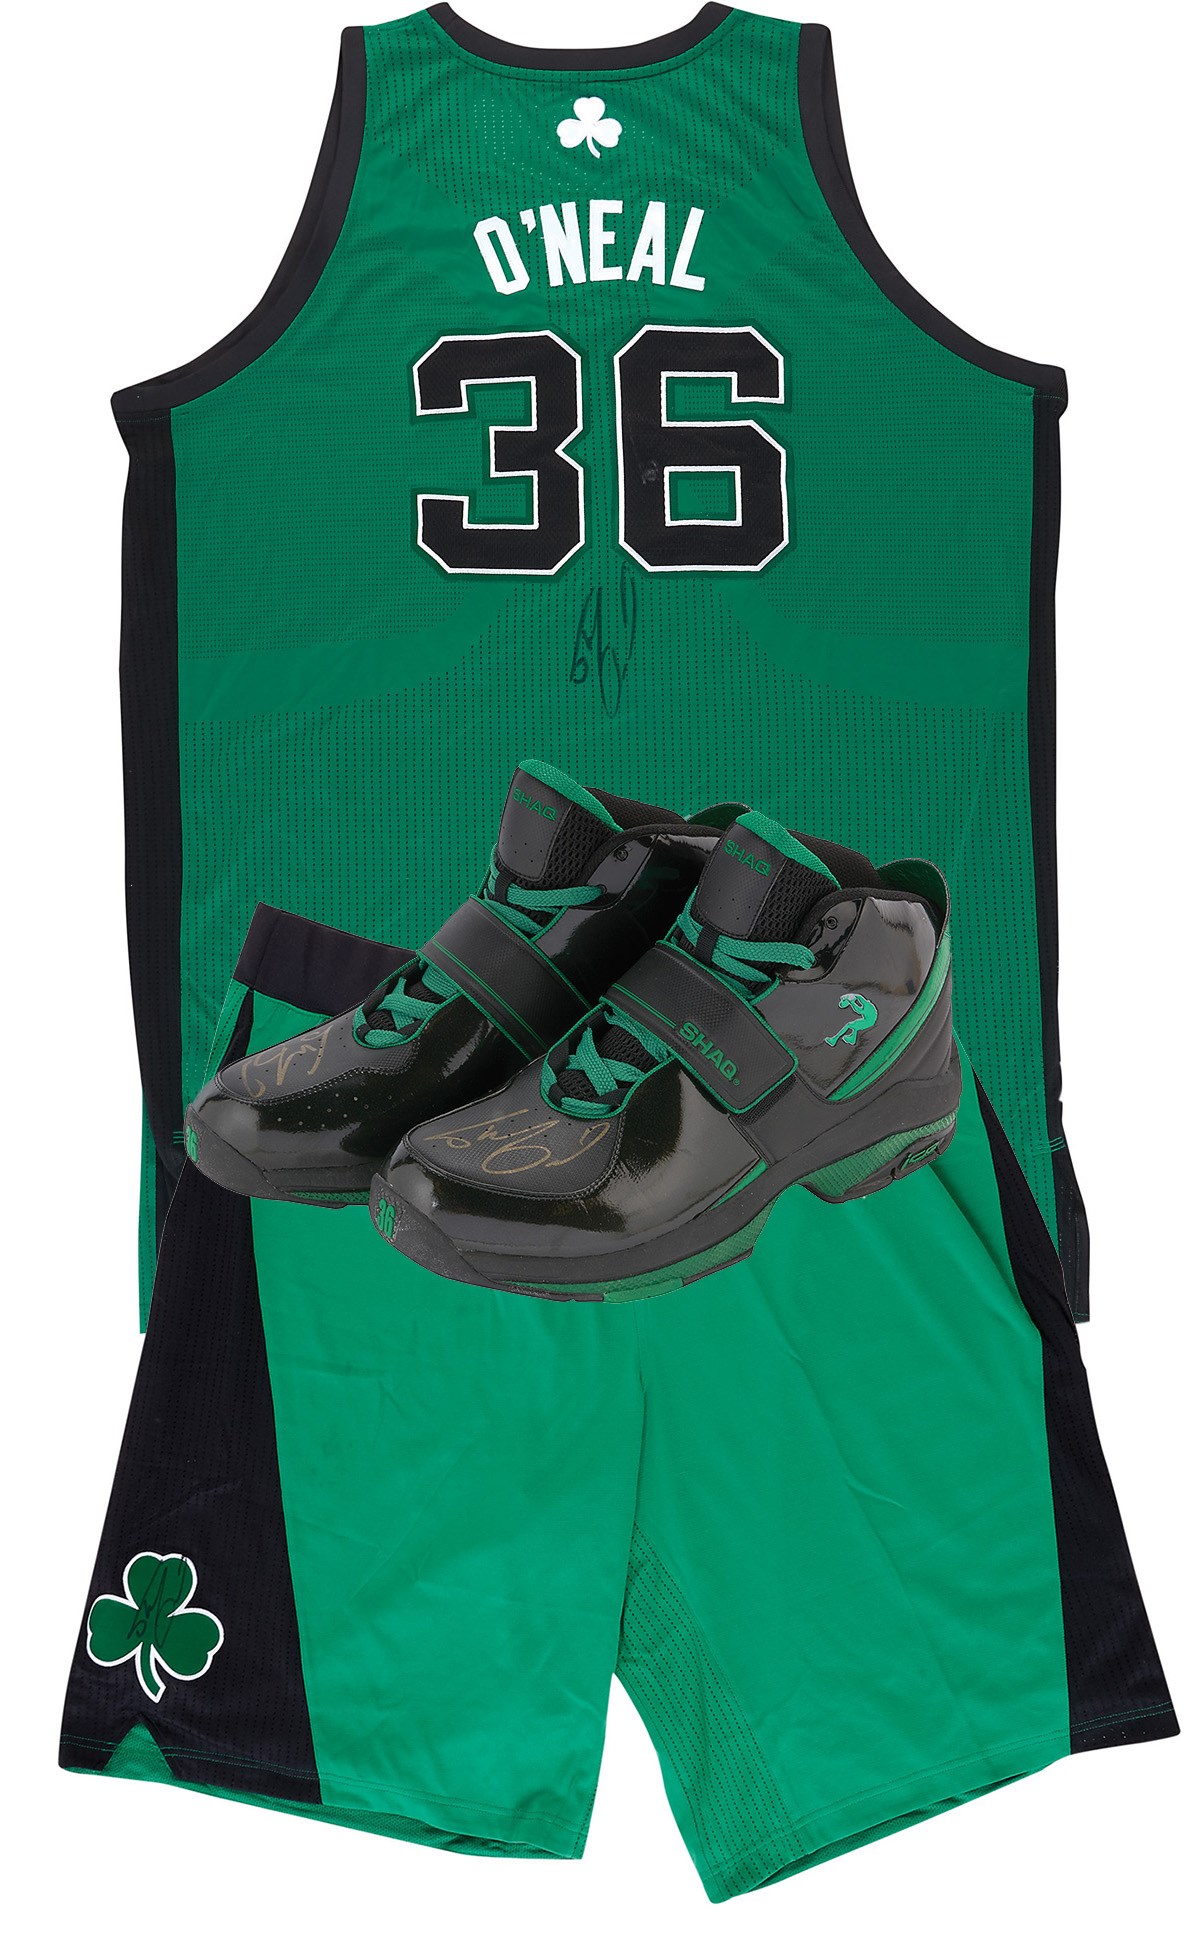 - 2010-11 Shaquille O'Neal Boston Celtics Game Worn Uniform & Sneakers Obtained Directly from Shaq (LOA)